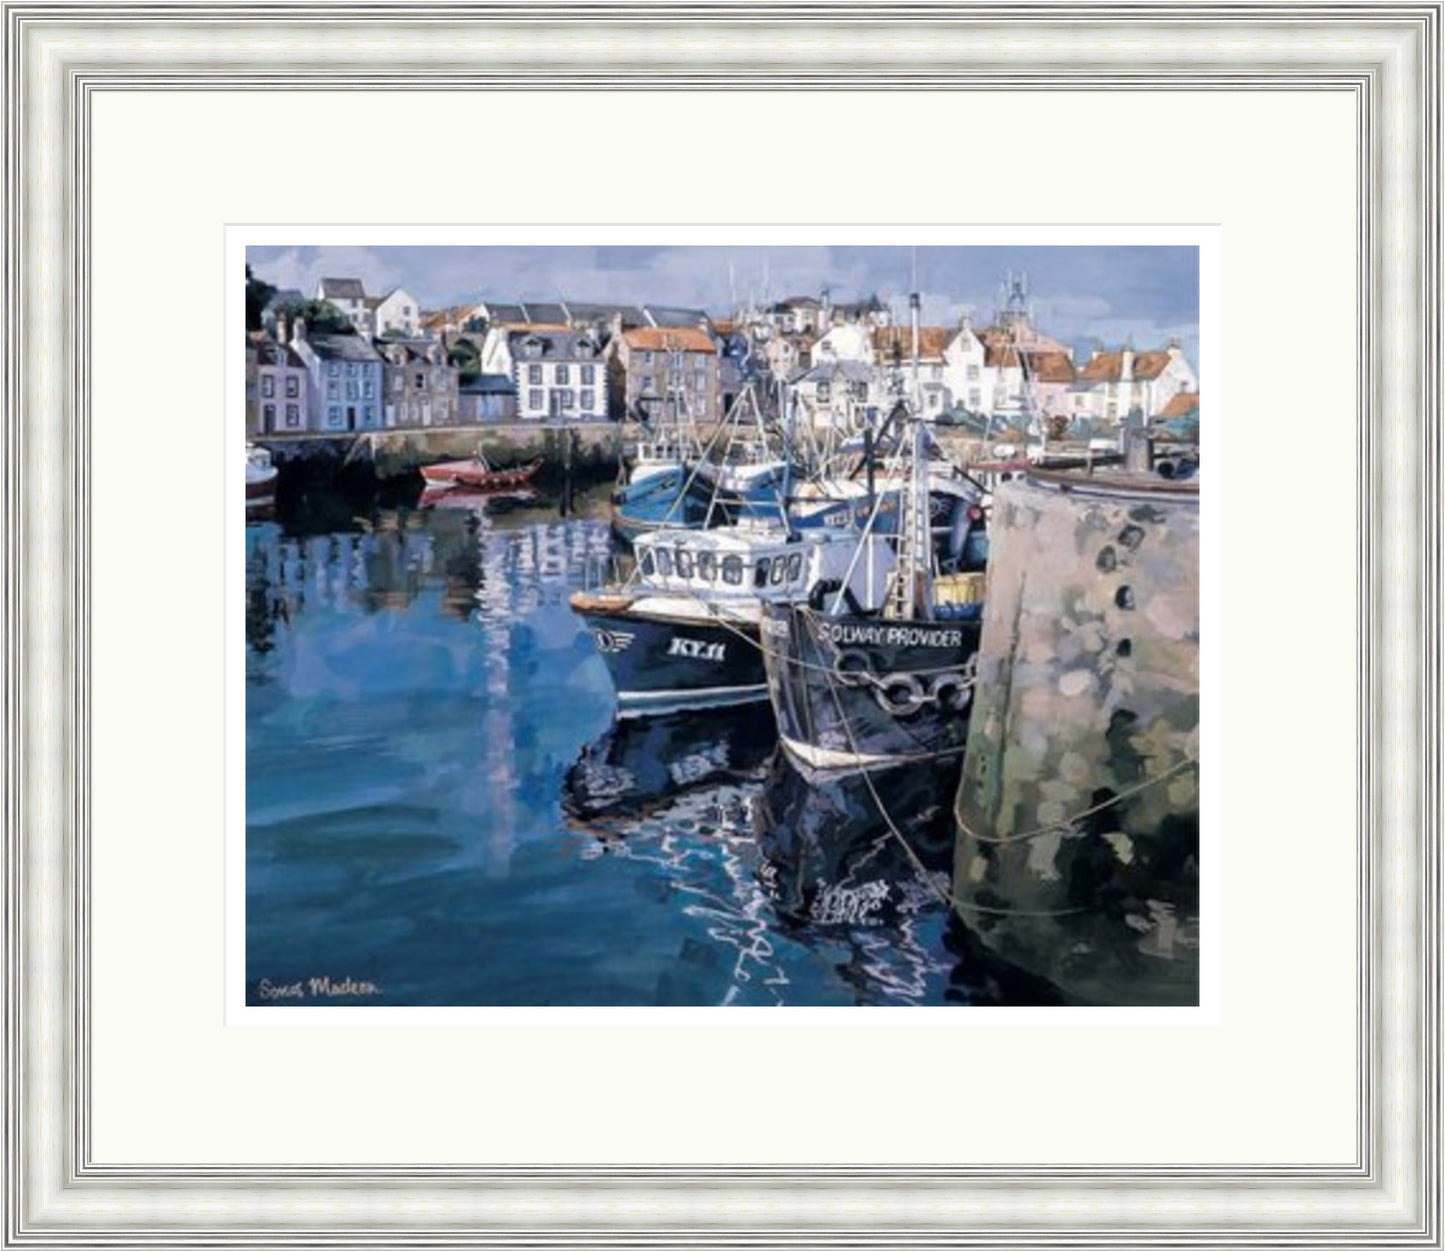 Providence, Anstruther Harbour by Sonas McLean